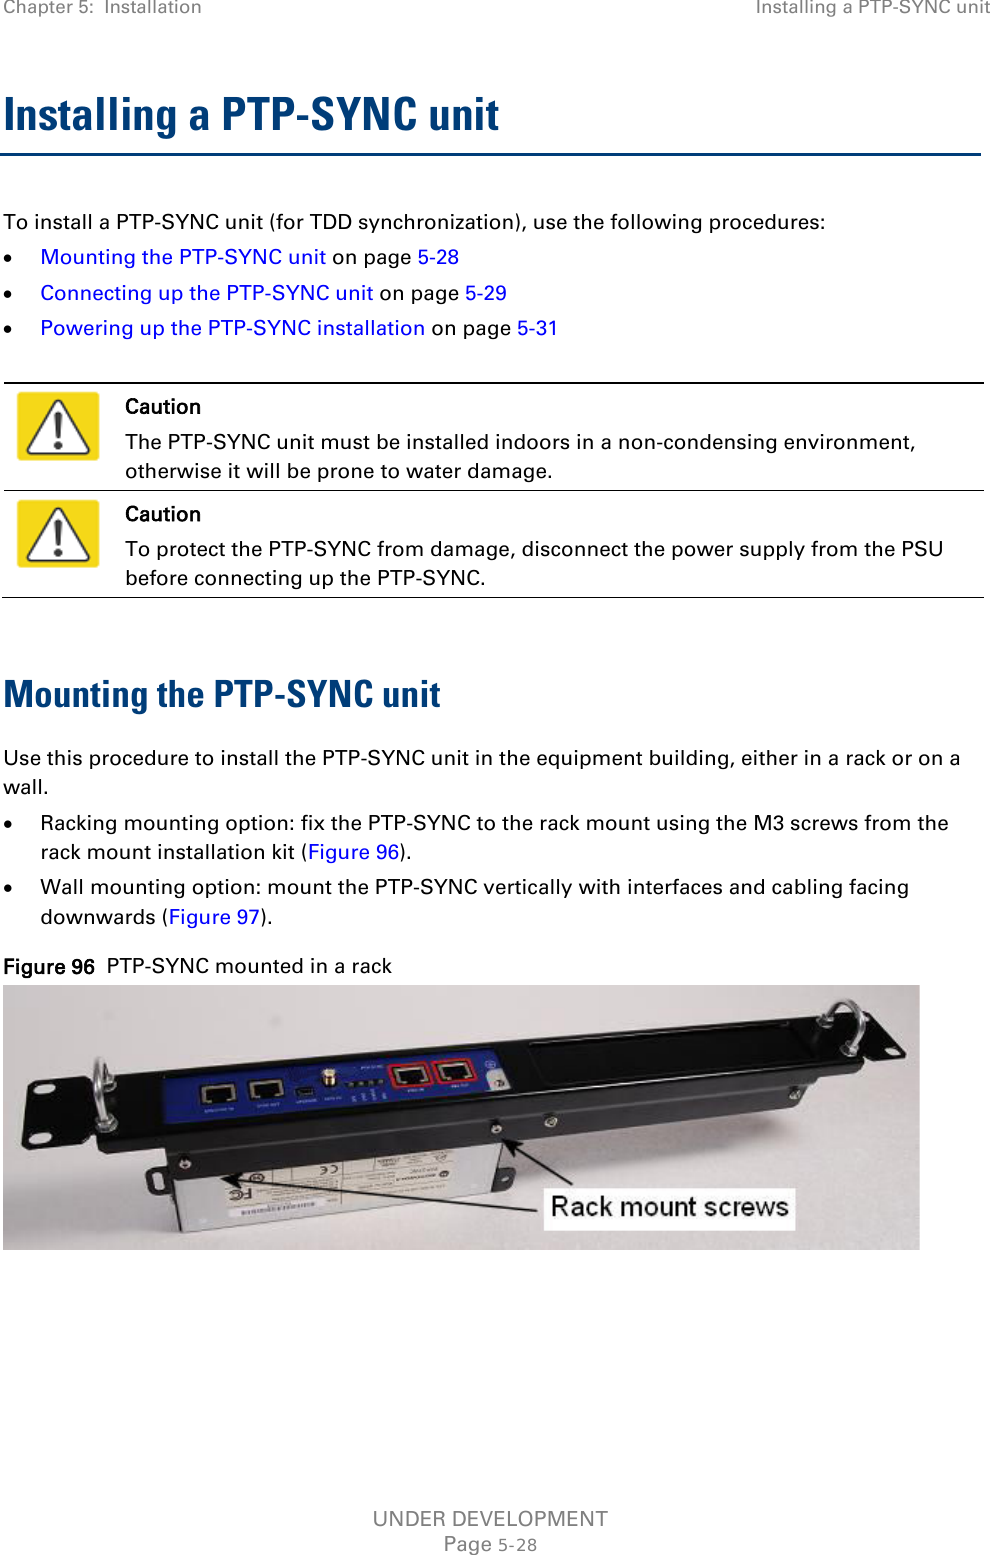 Chapter 5:  Installation Installing a PTP-SYNC unit  Installing a PTP-SYNC unit To install a PTP-SYNC unit (for TDD synchronization), use the following procedures: • Mounting the PTP-SYNC unit on page 5-28 • Connecting up the PTP-SYNC unit on page 5-29 • Powering up the PTP-SYNC installation on page 5-31   Caution The PTP-SYNC unit must be installed indoors in a non-condensing environment, otherwise it will be prone to water damage.  Caution To protect the PTP-SYNC from damage, disconnect the power supply from the PSU before connecting up the PTP-SYNC.  Mounting the PTP-SYNC unit Use this procedure to install the PTP-SYNC unit in the equipment building, either in a rack or on a wall. • Racking mounting option: fix the PTP-SYNC to the rack mount using the M3 screws from the rack mount installation kit (Figure 96). • Wall mounting option: mount the PTP-SYNC vertically with interfaces and cabling facing downwards (Figure 97). Figure 96  PTP-SYNC mounted in a rack   UNDER DEVELOPMENT Page 5-28 